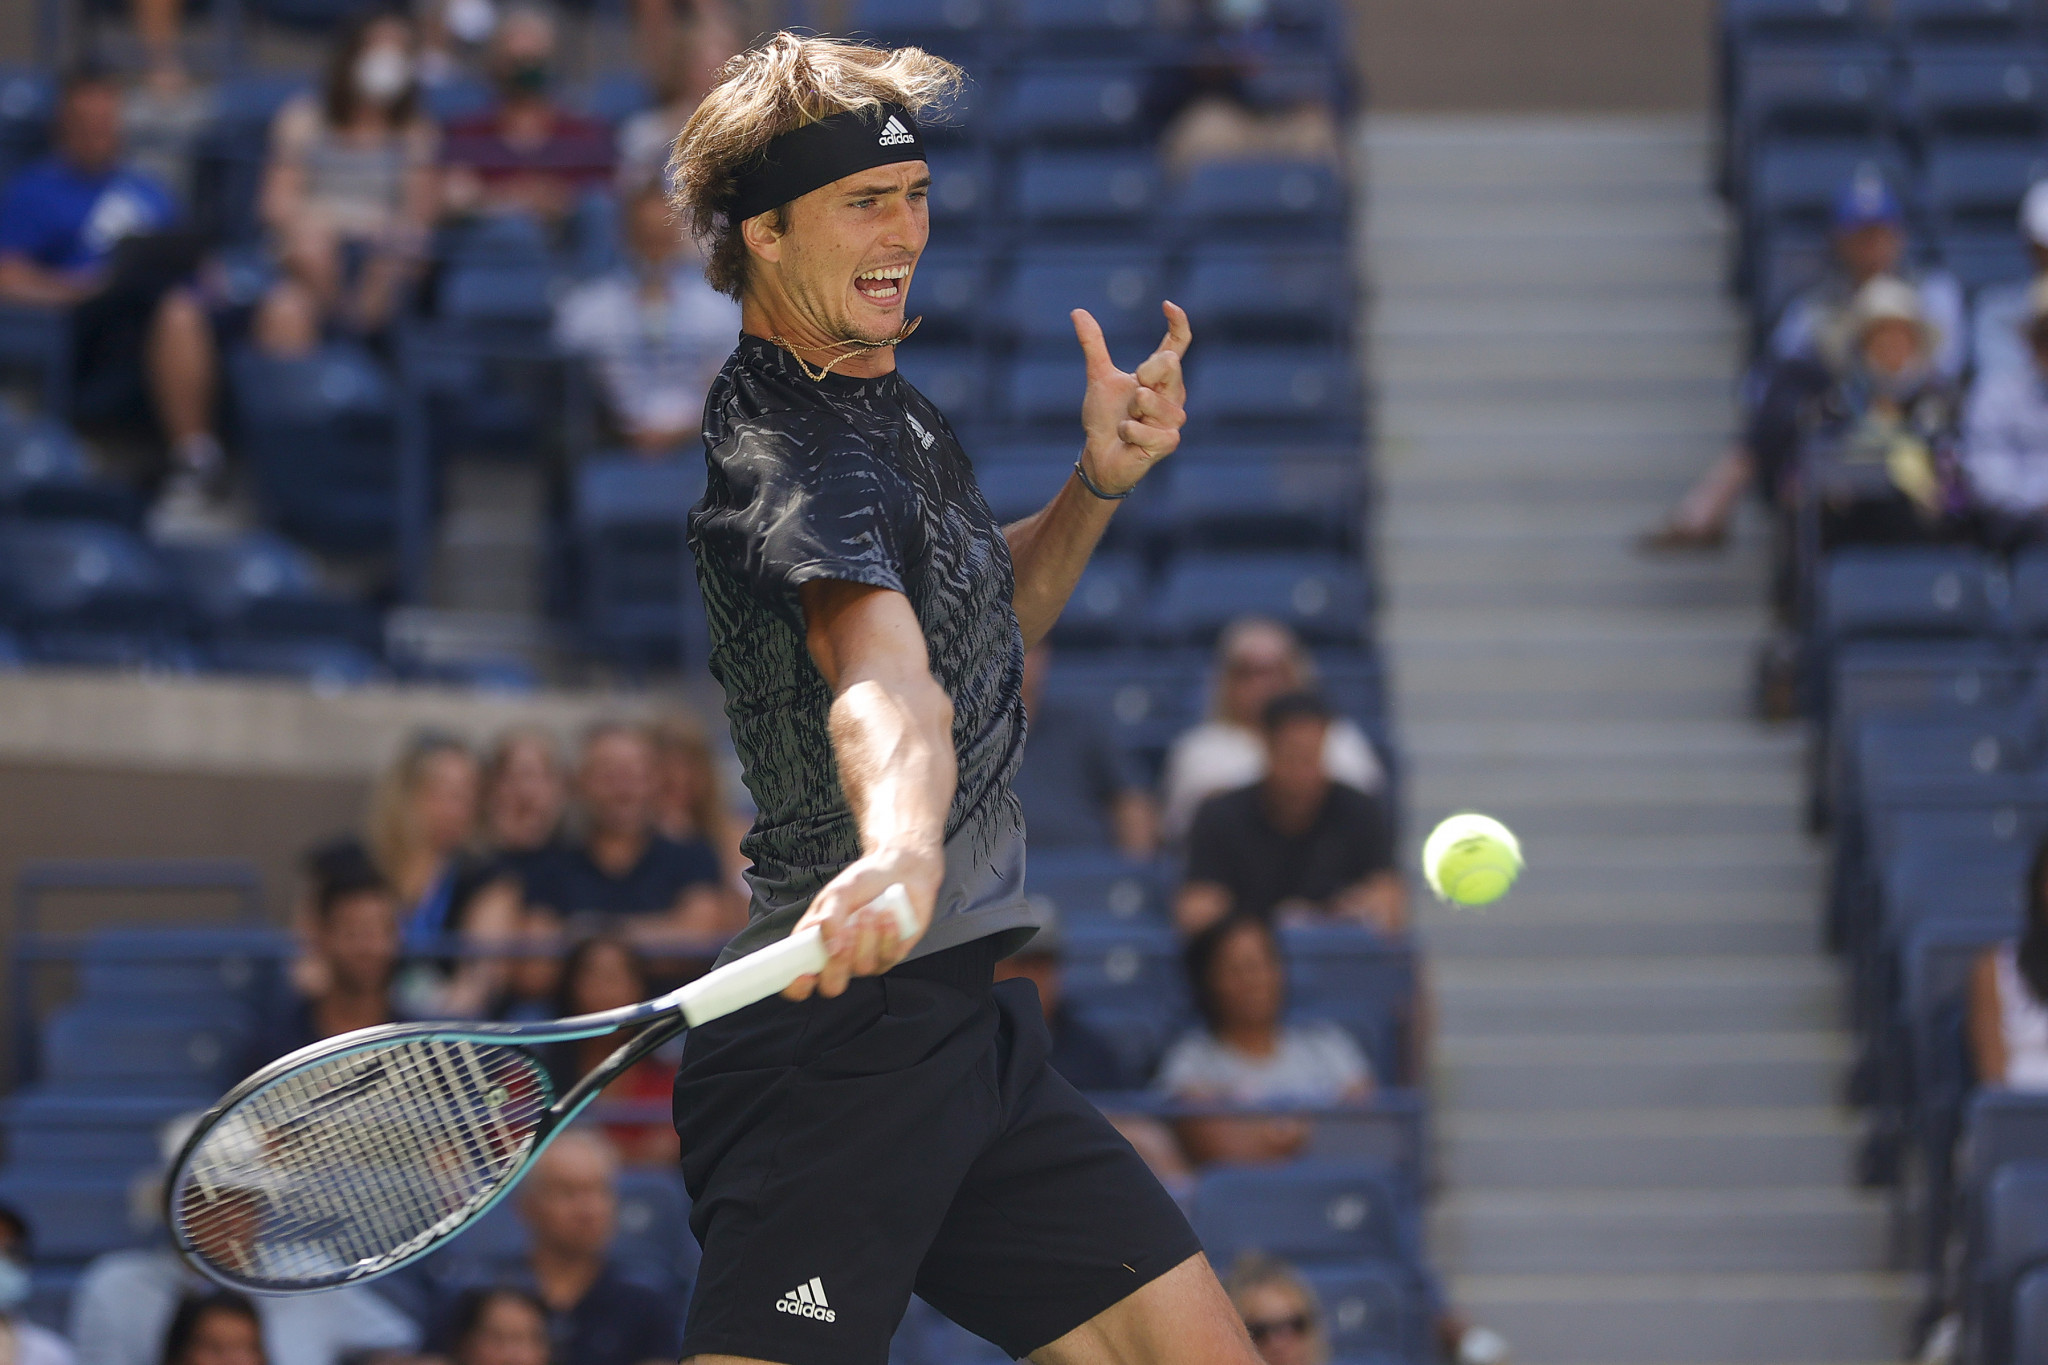 German Alexander Zverev - the Olympic champion and fourth seed in New York - needed just 74 minutes to beat Spaniard Albert Ramos-Vinolas 6-1, 6-0, 6-3